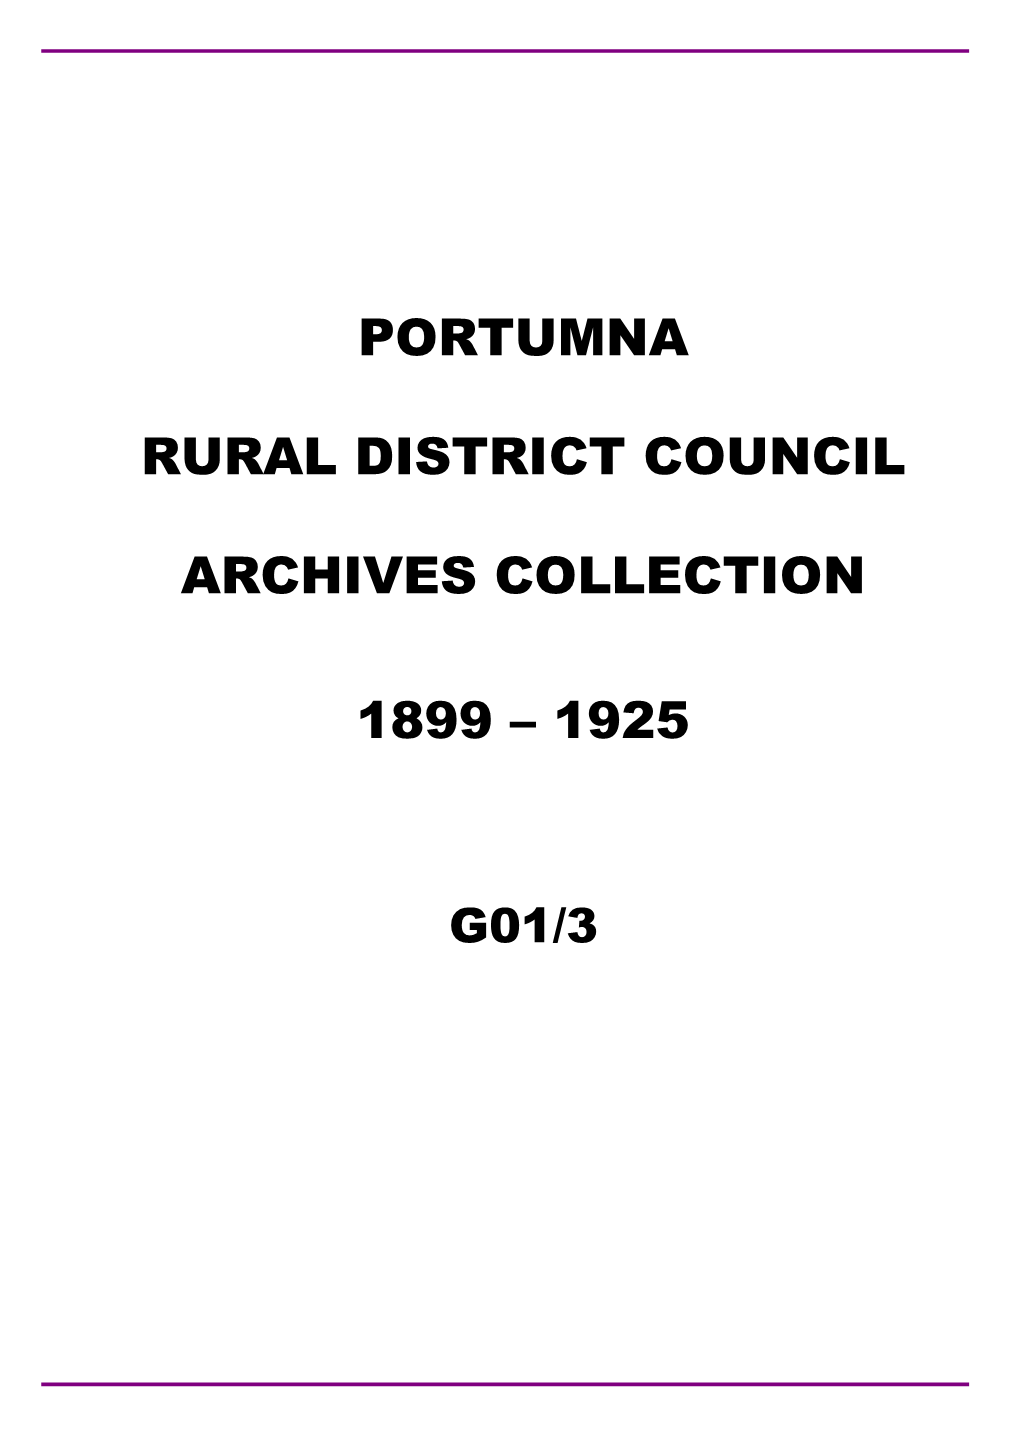 Portumna Rural District Council Archives Collection 1899 – 1925 G01/3